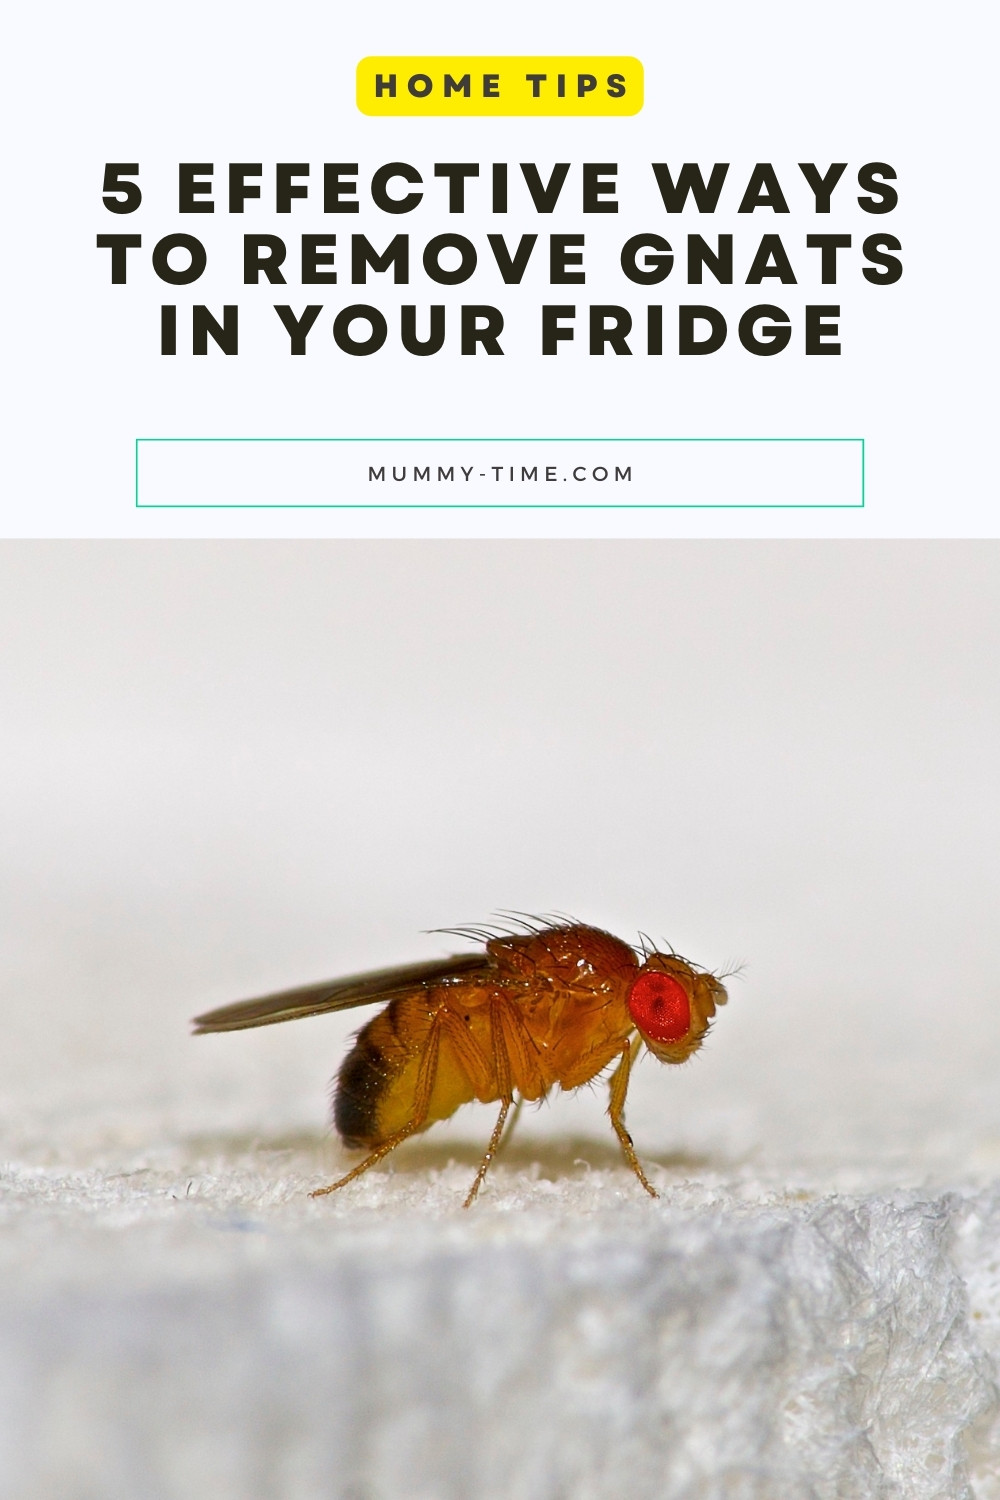 5 Effective Ways to Remove Gnats in Your Fridge